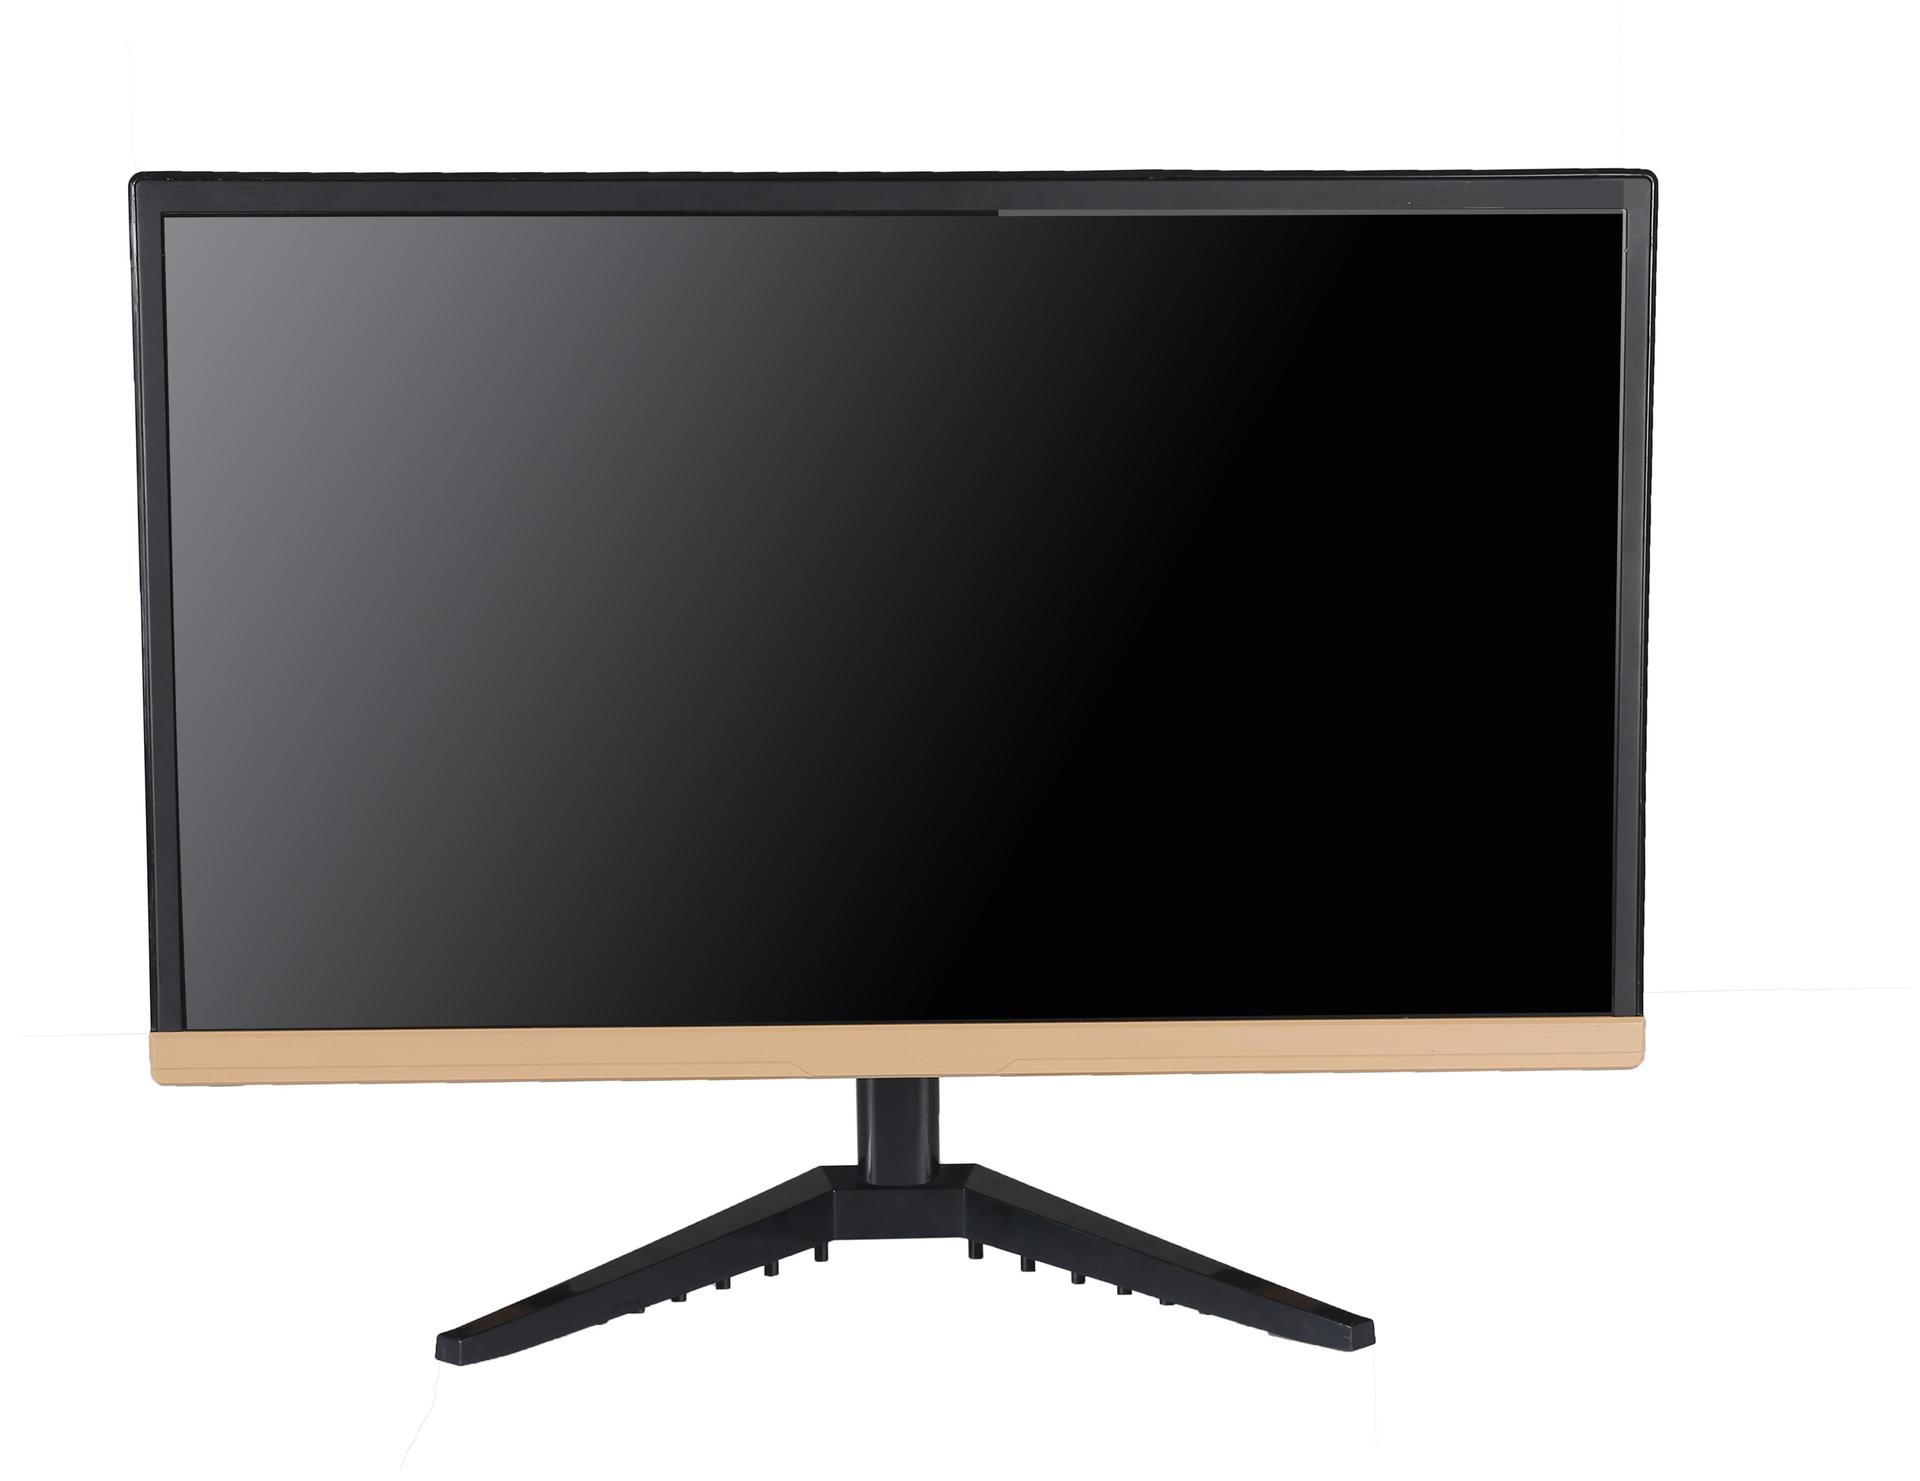 curve screen 21.5 inch led monitor modern design for lcd screen